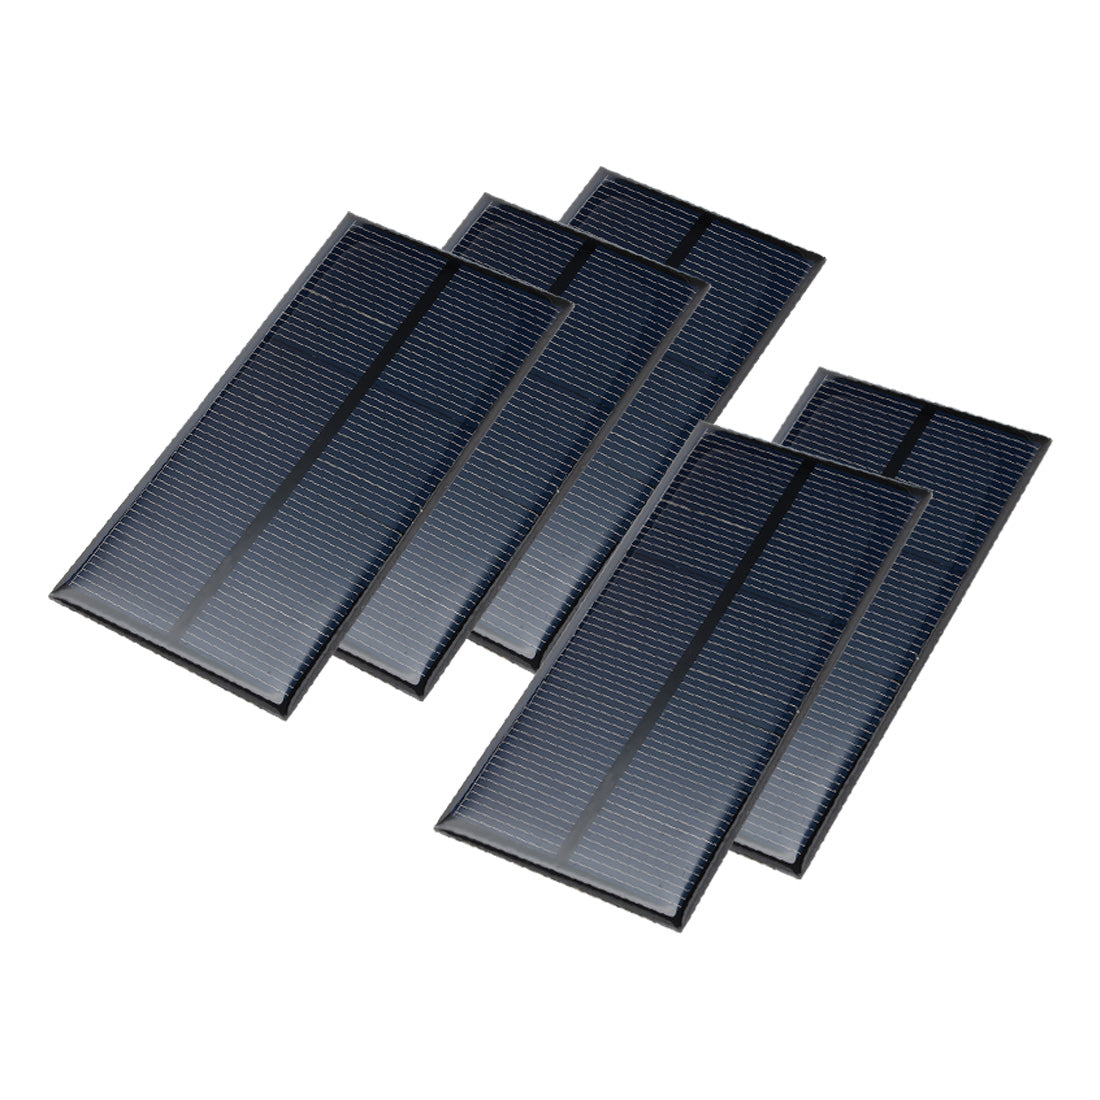 uxcell Uxcell 5Pcs 7.5V 100mA Poly Mini Solar Cell Panel Module DIY for Light Toys Charger 110mm x 55mm